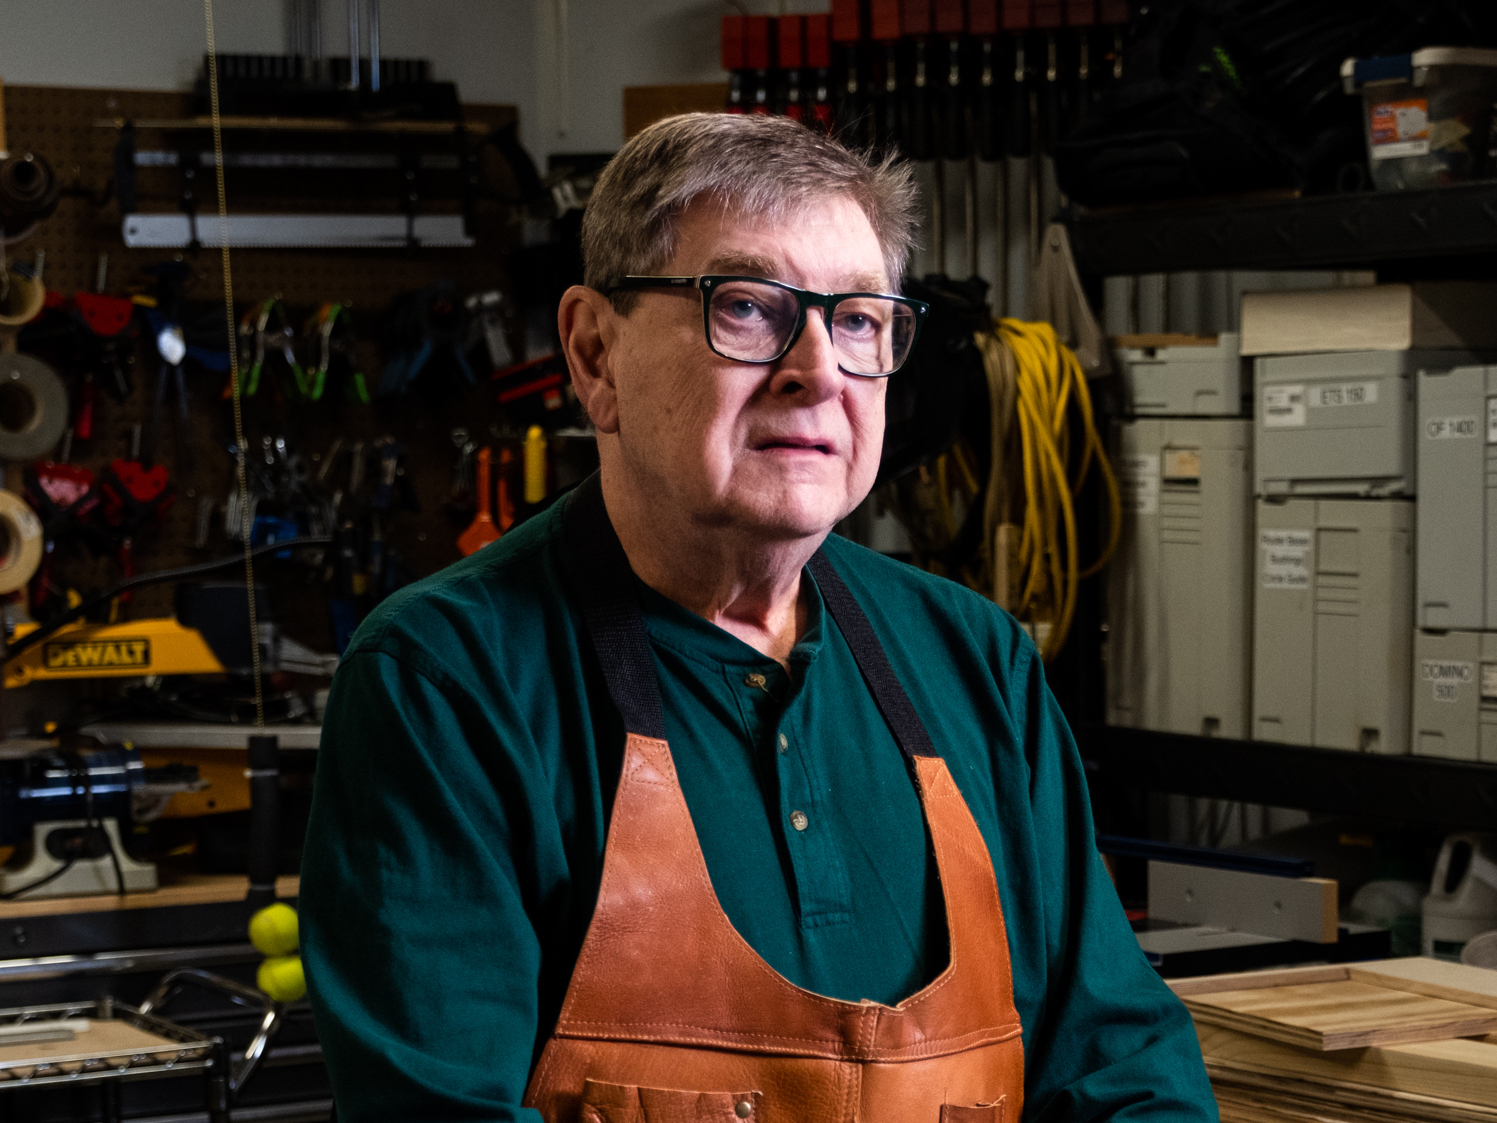 Tom Noffsinger stands in his garage workshop, where he uses a SawStop table saw for woodworking at his home in Raleigh, North Carolina. About 20 years ago, Noffsinger had a table saw accident and almost lost his thumb.